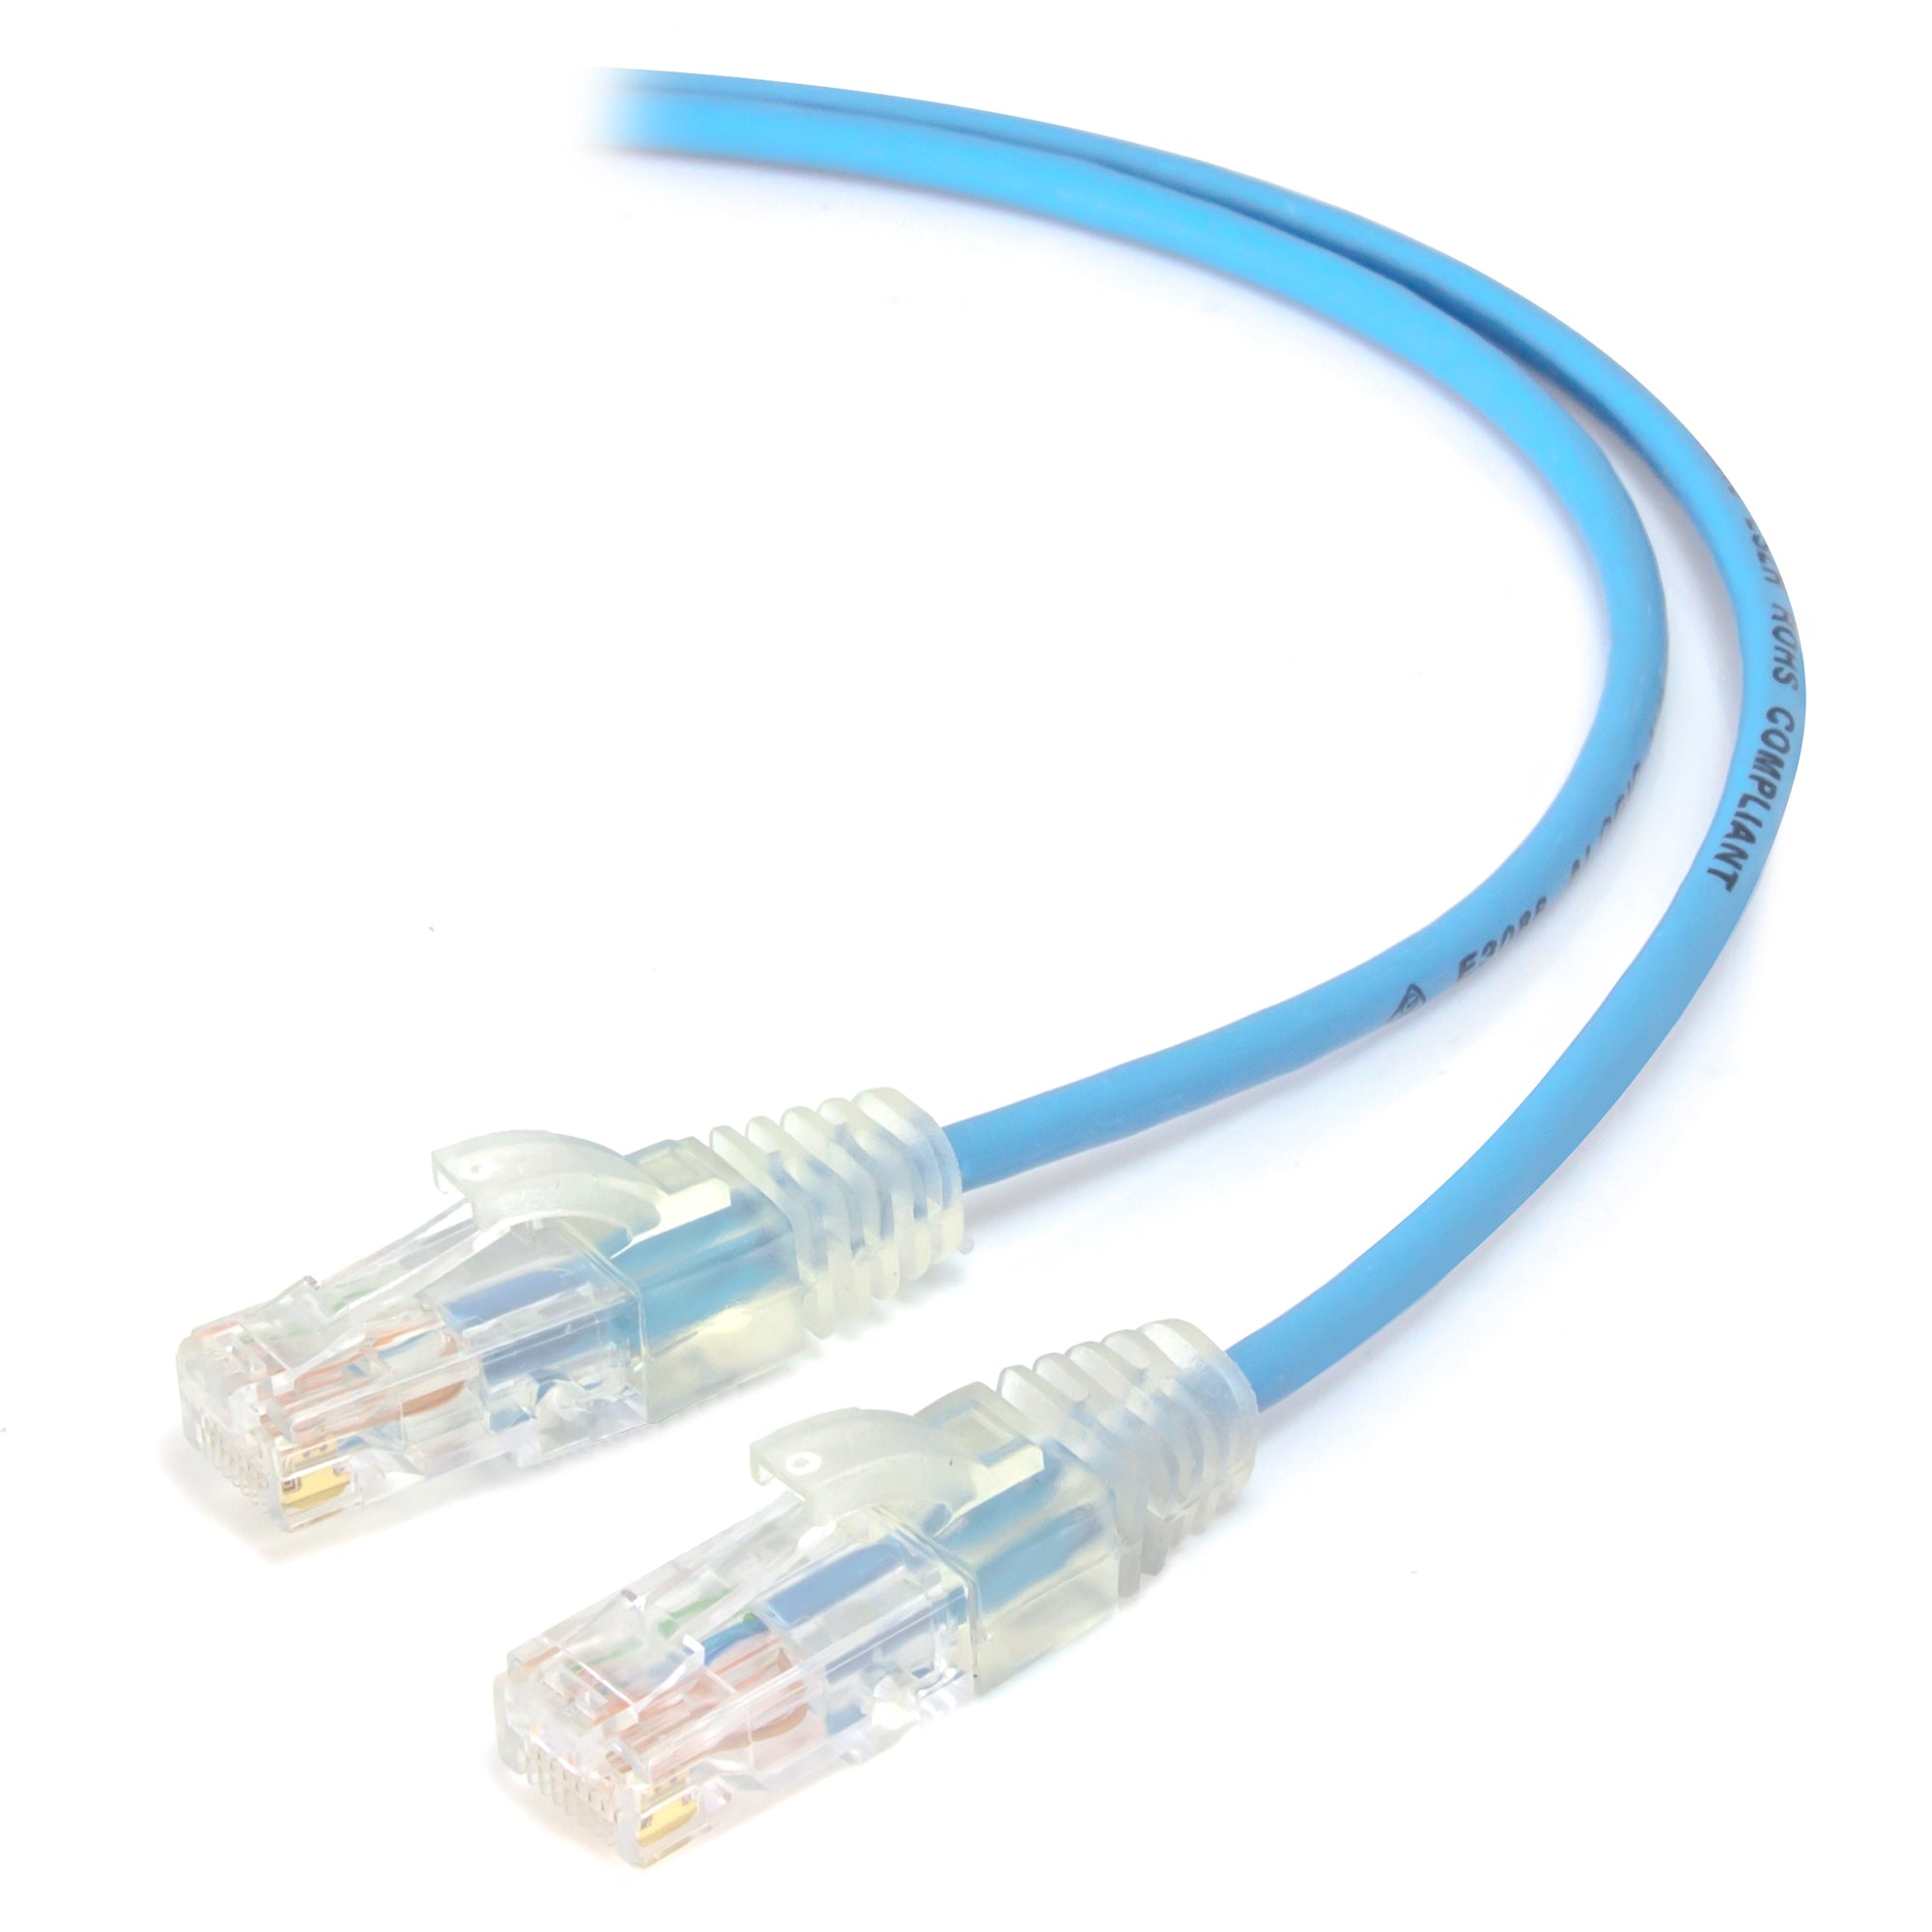 0.50m Blue Ultra Slim Cat6 Network Cable, UTP, 28AWG